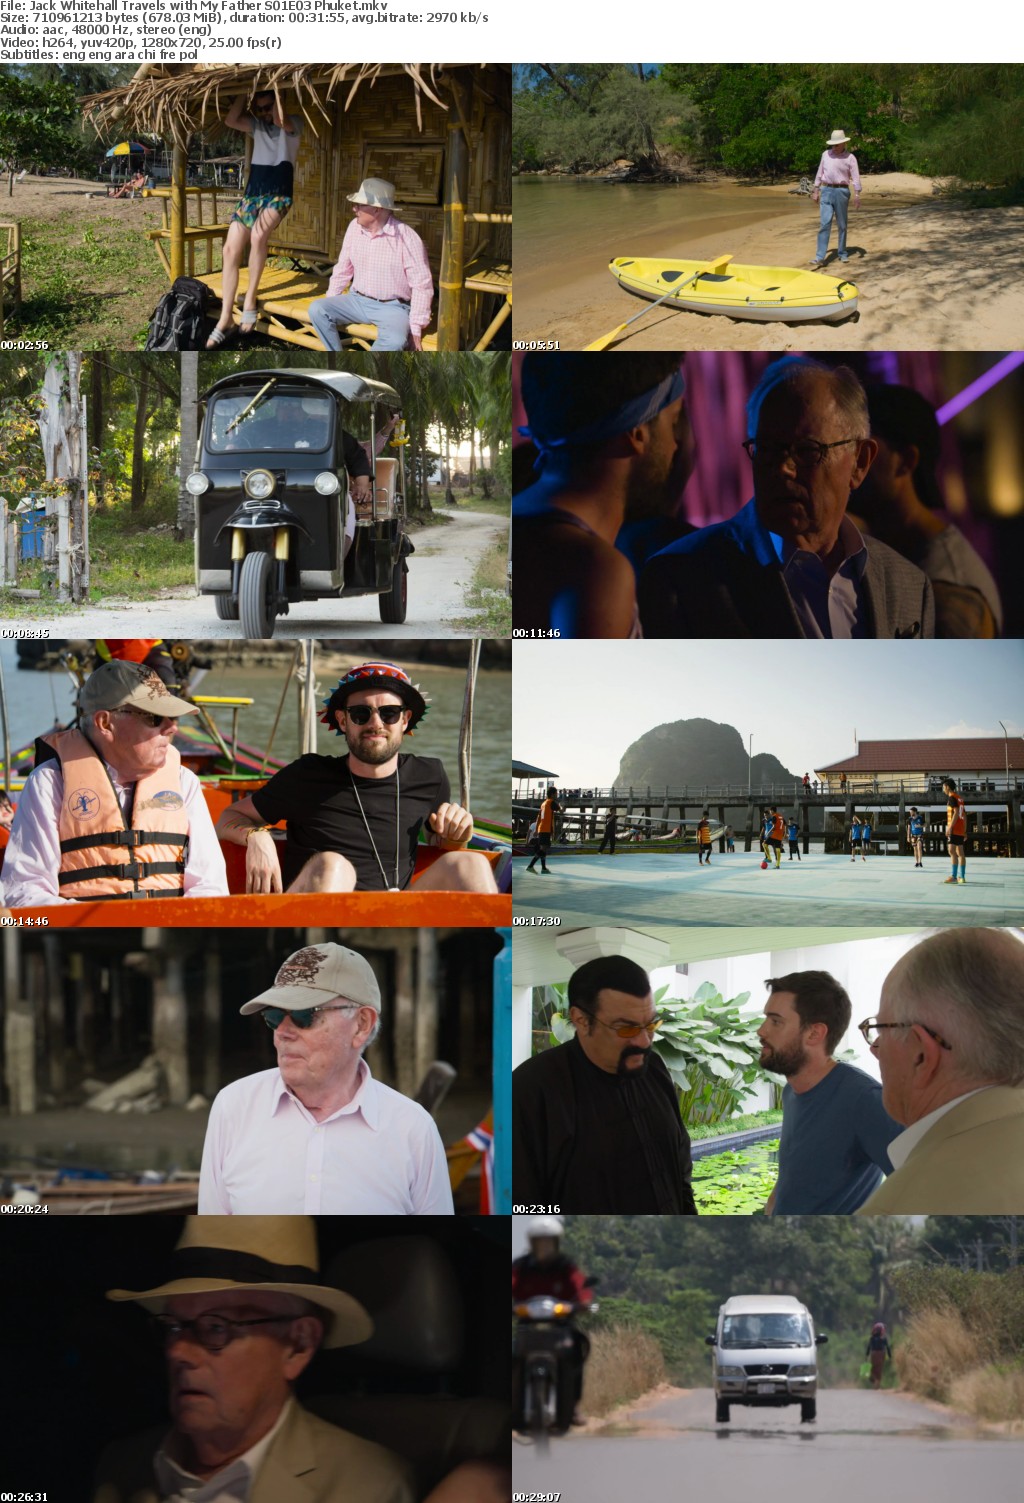 Jack Whitehall Travels With My Father 2017 Season 1 Complete 720p NF WEBRip x264 i c